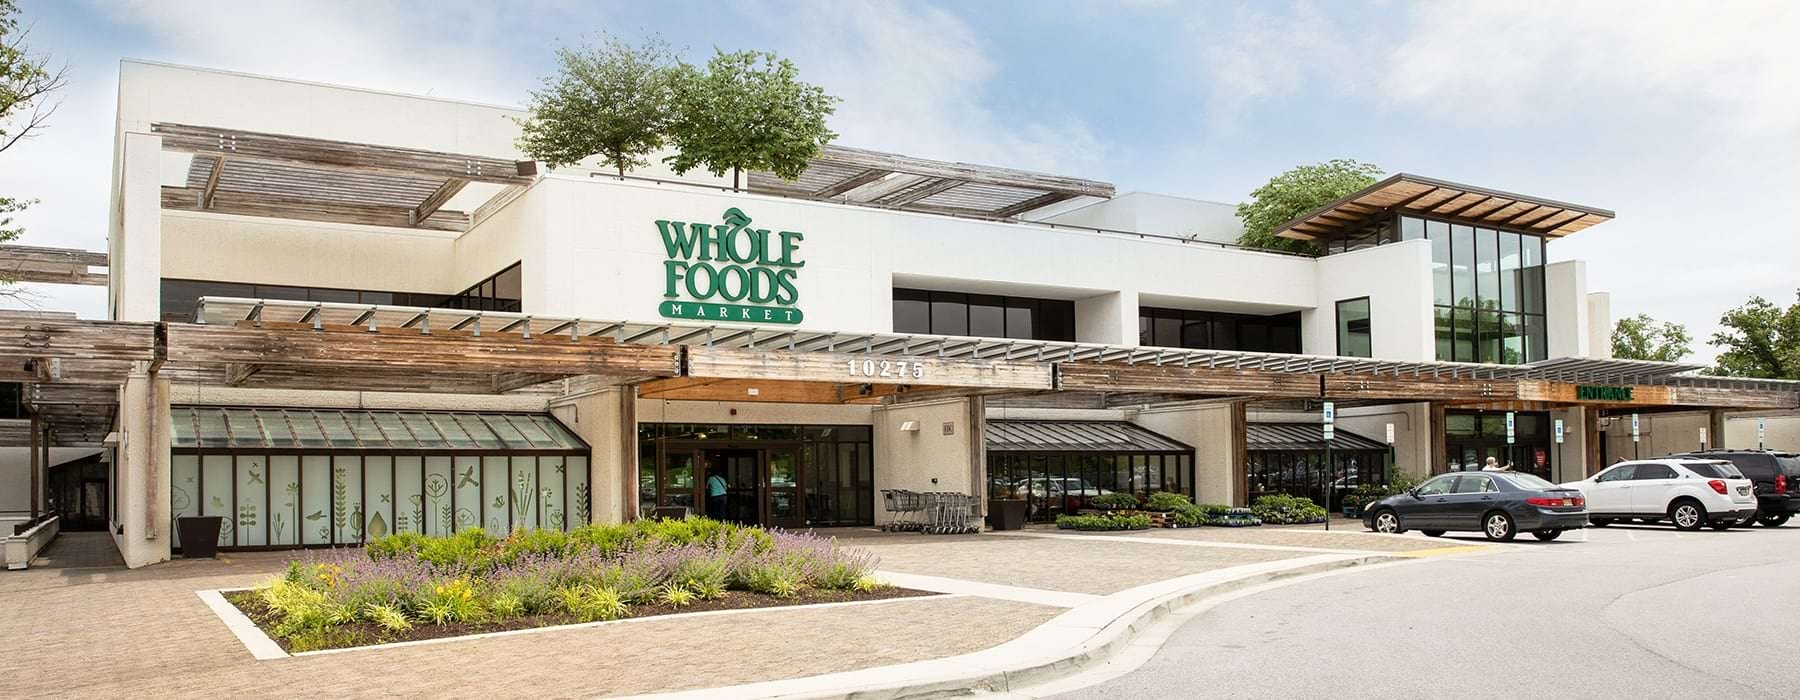 local Whole Foods storefront view from parking lot